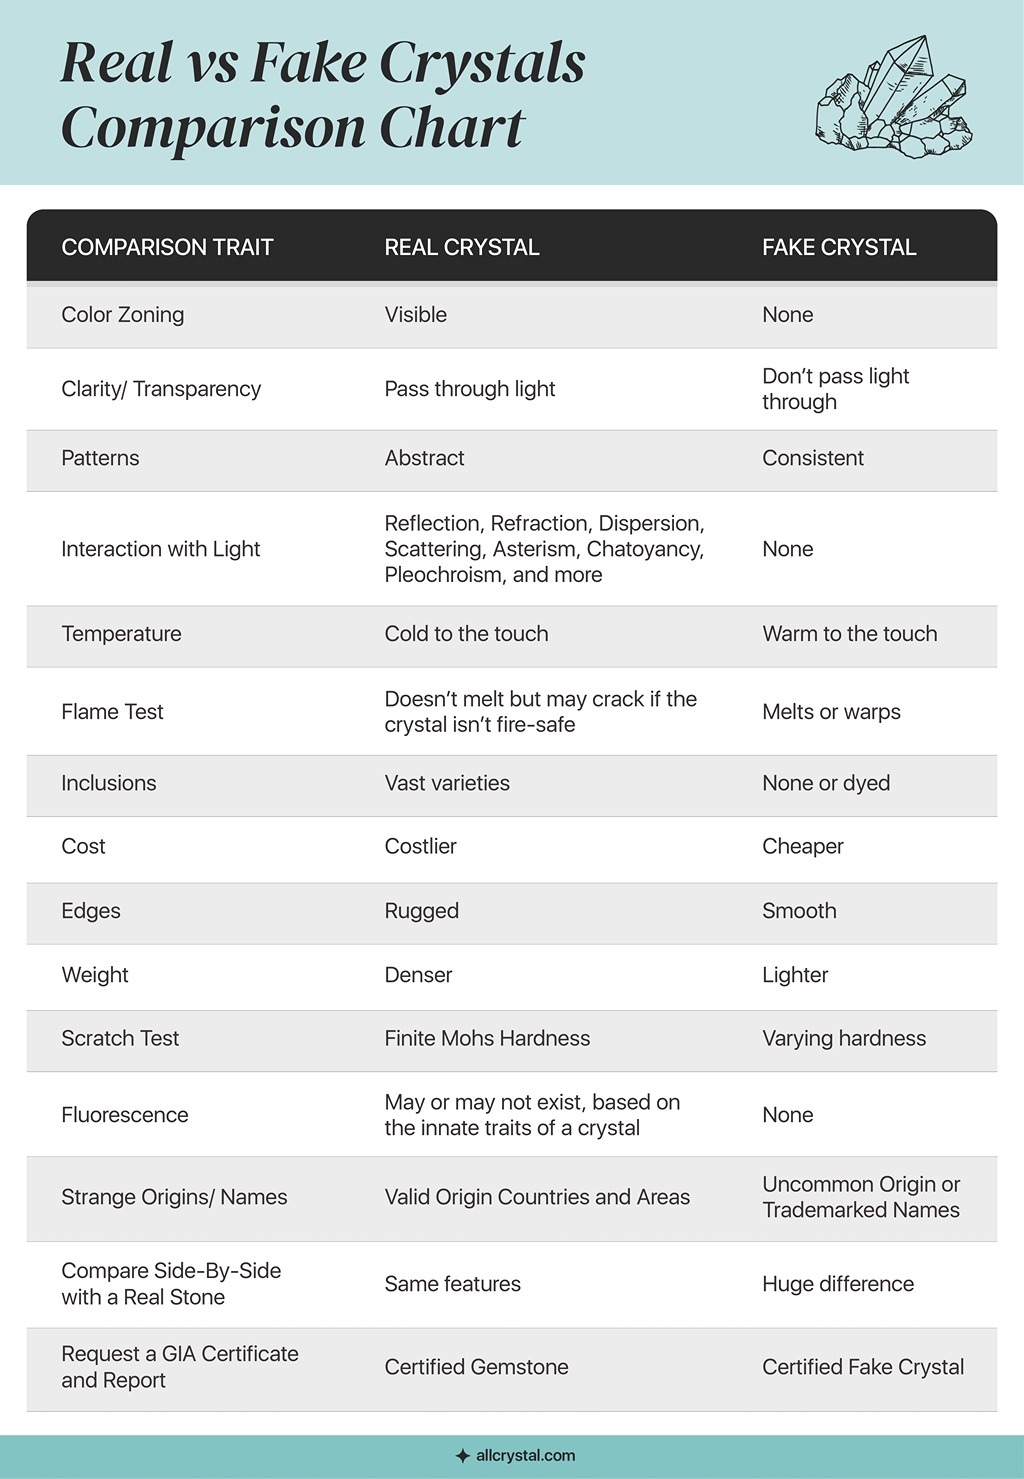 A graphic table for real vs fake crystals